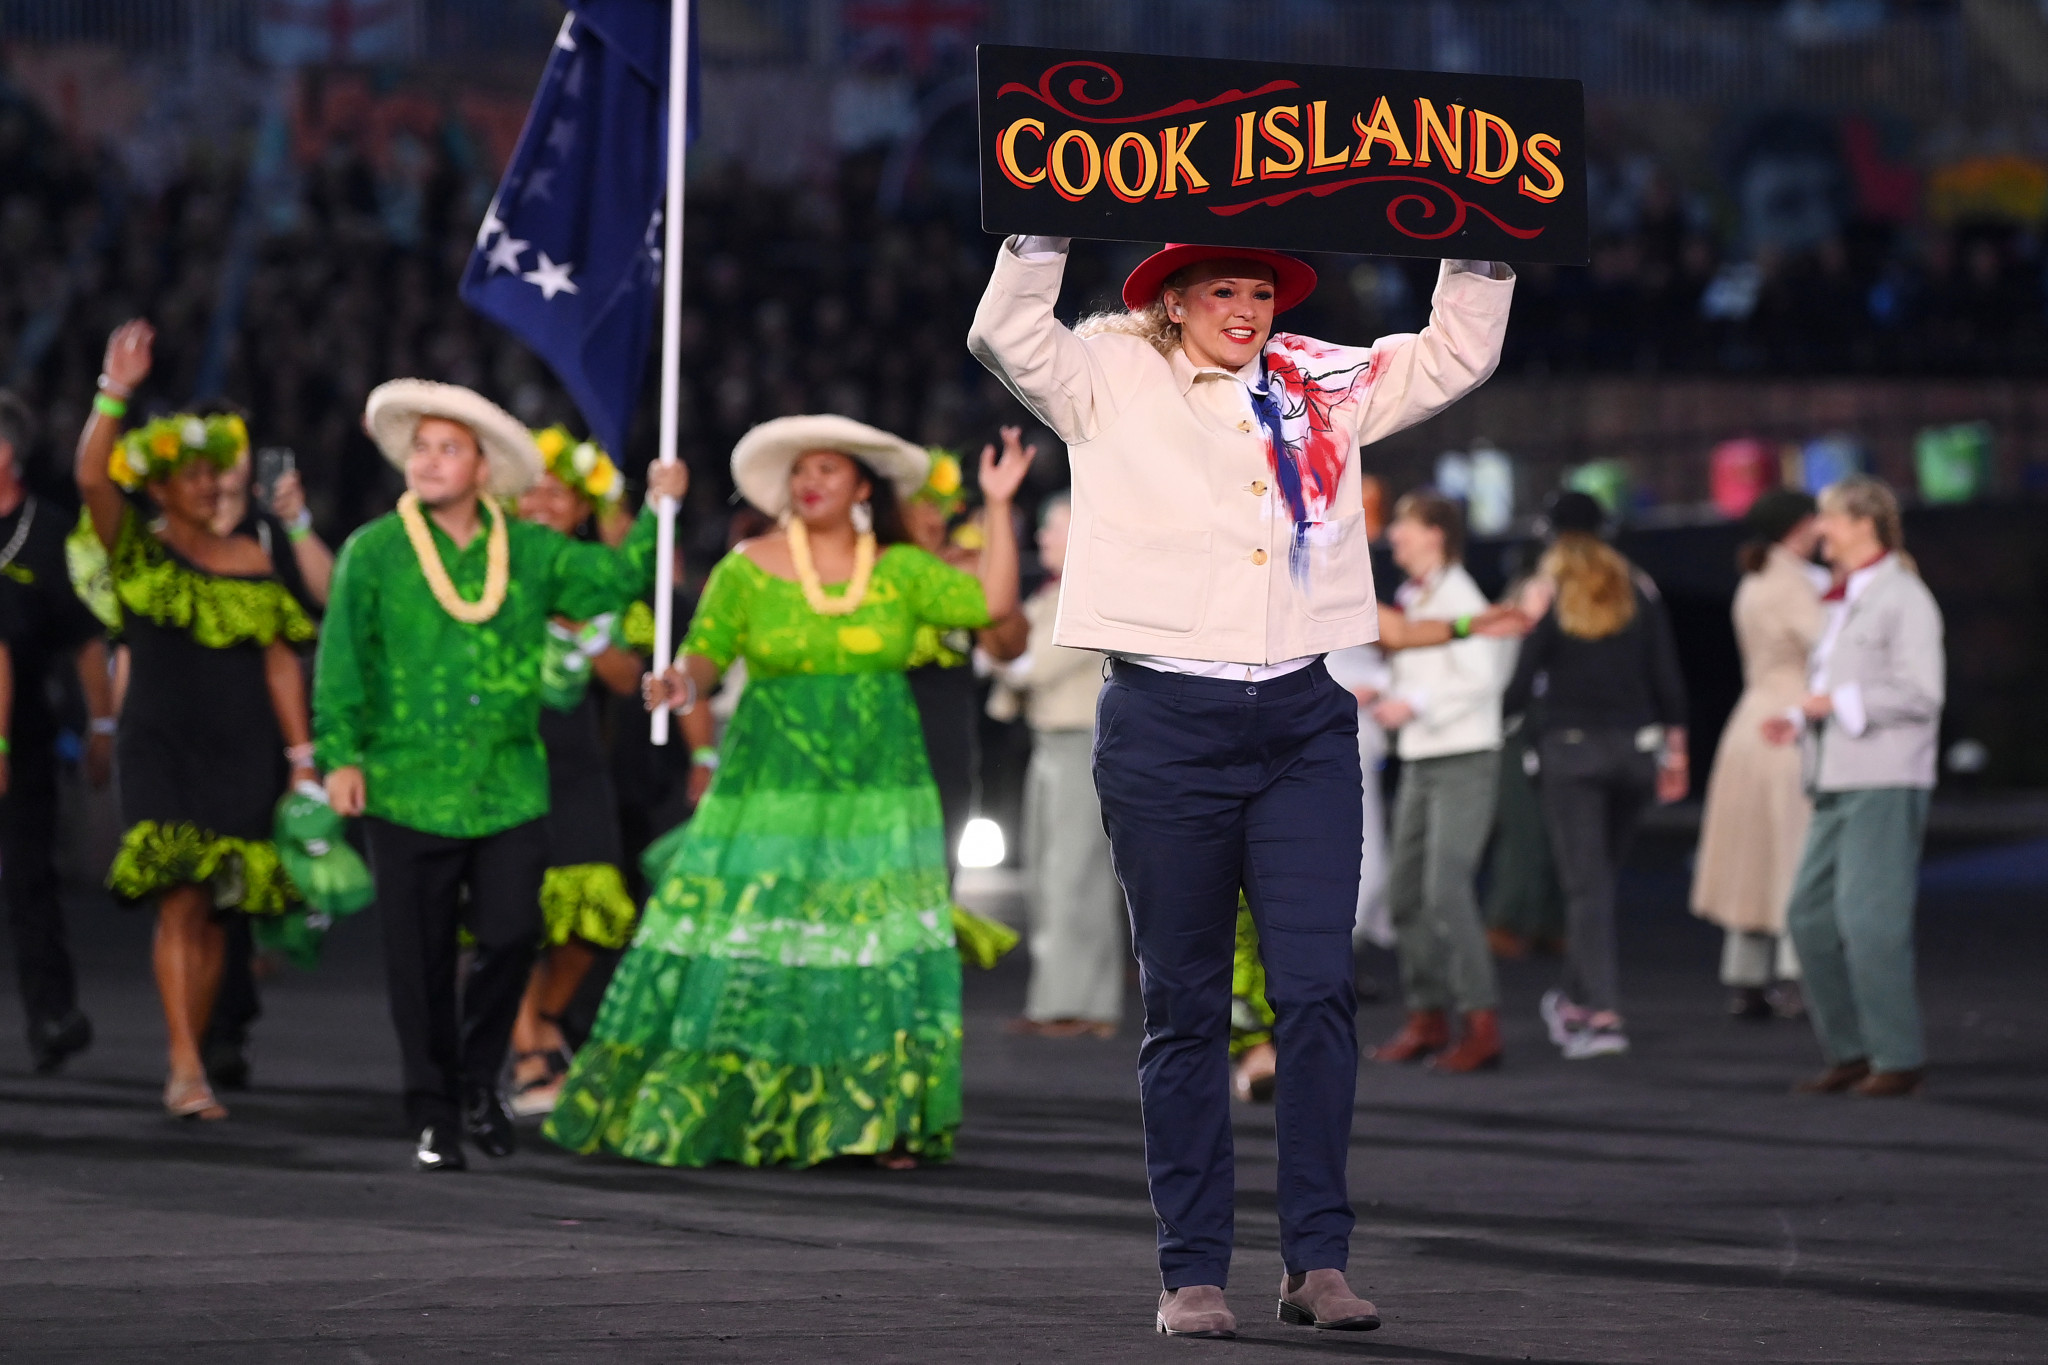 The Cook Islands sent a team of 18 athletes to the Birmingham 2022 Commonwealth Games ©Getty Images